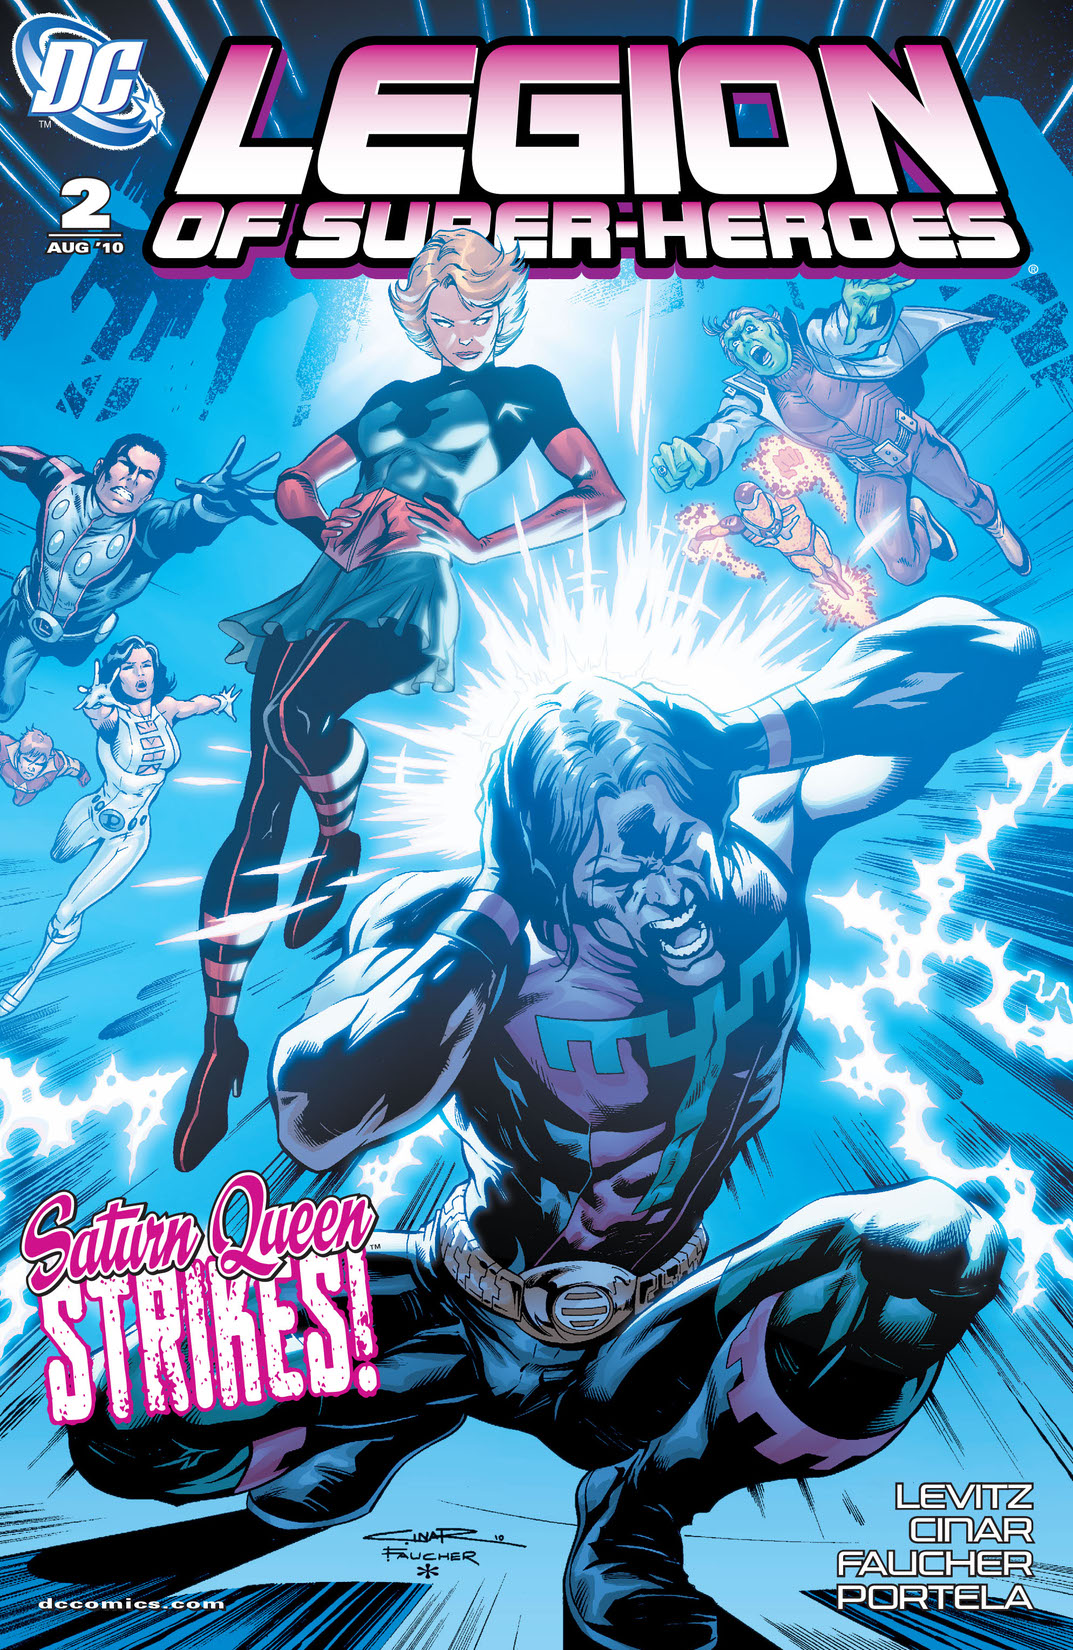 Legion of Super-Heroes (2010-) #2 preview images